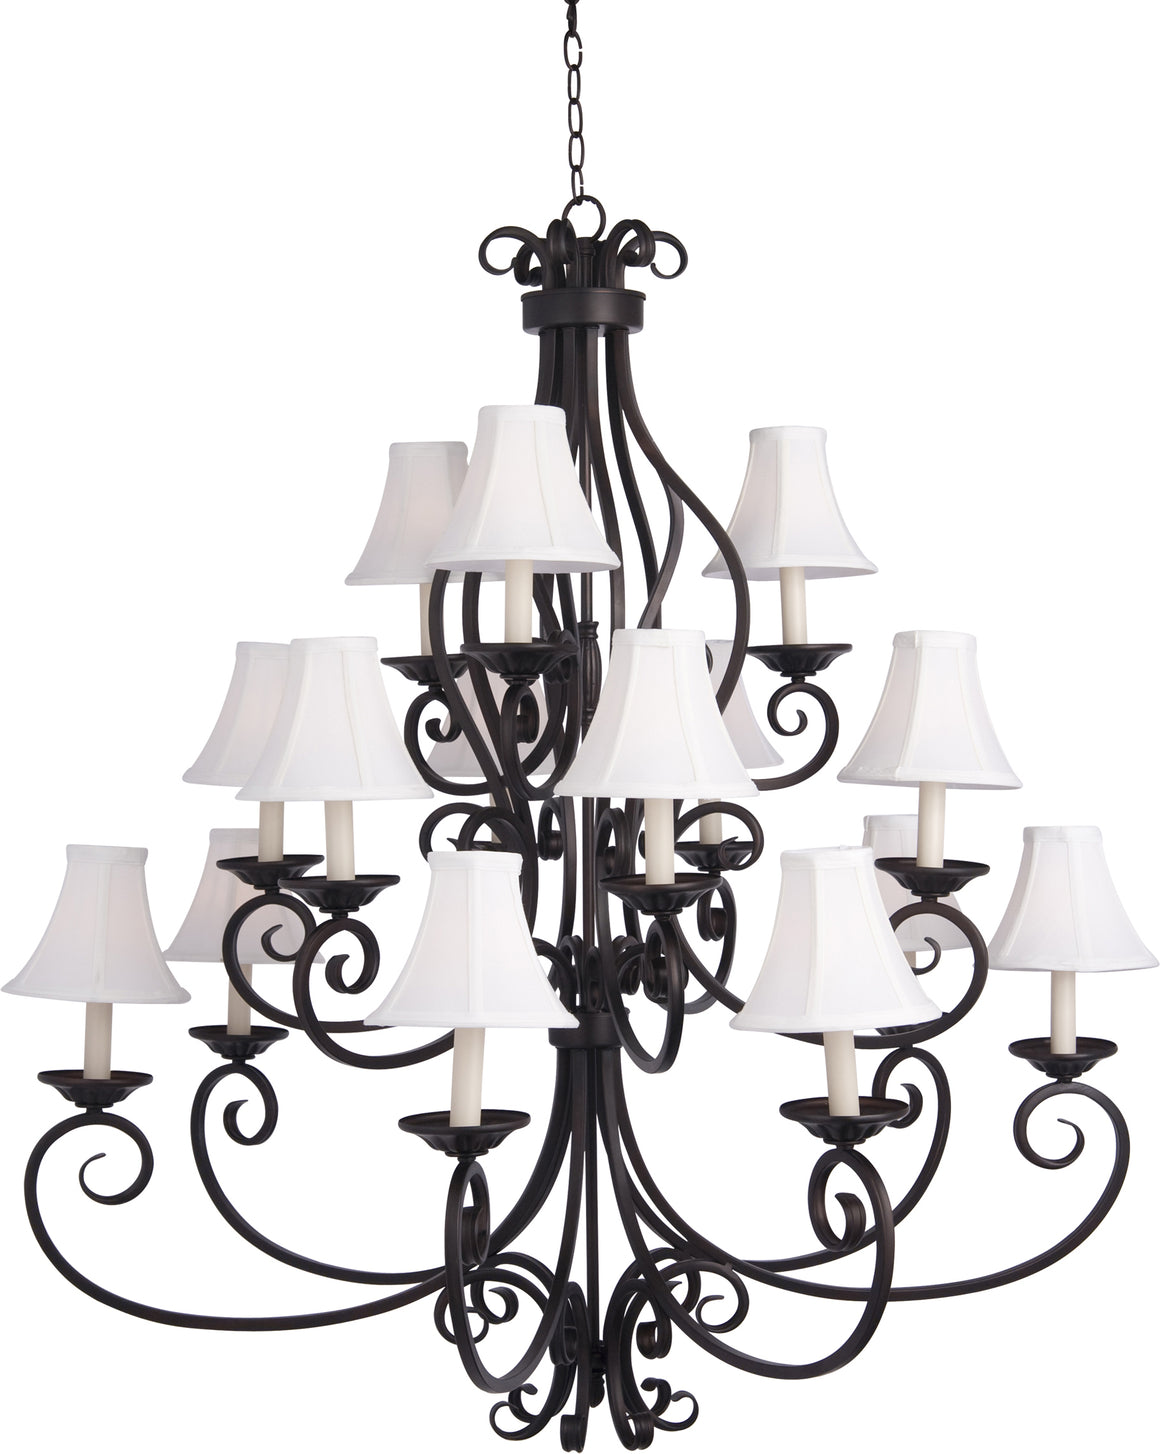 Manor 15-Light Chandelier with Shades